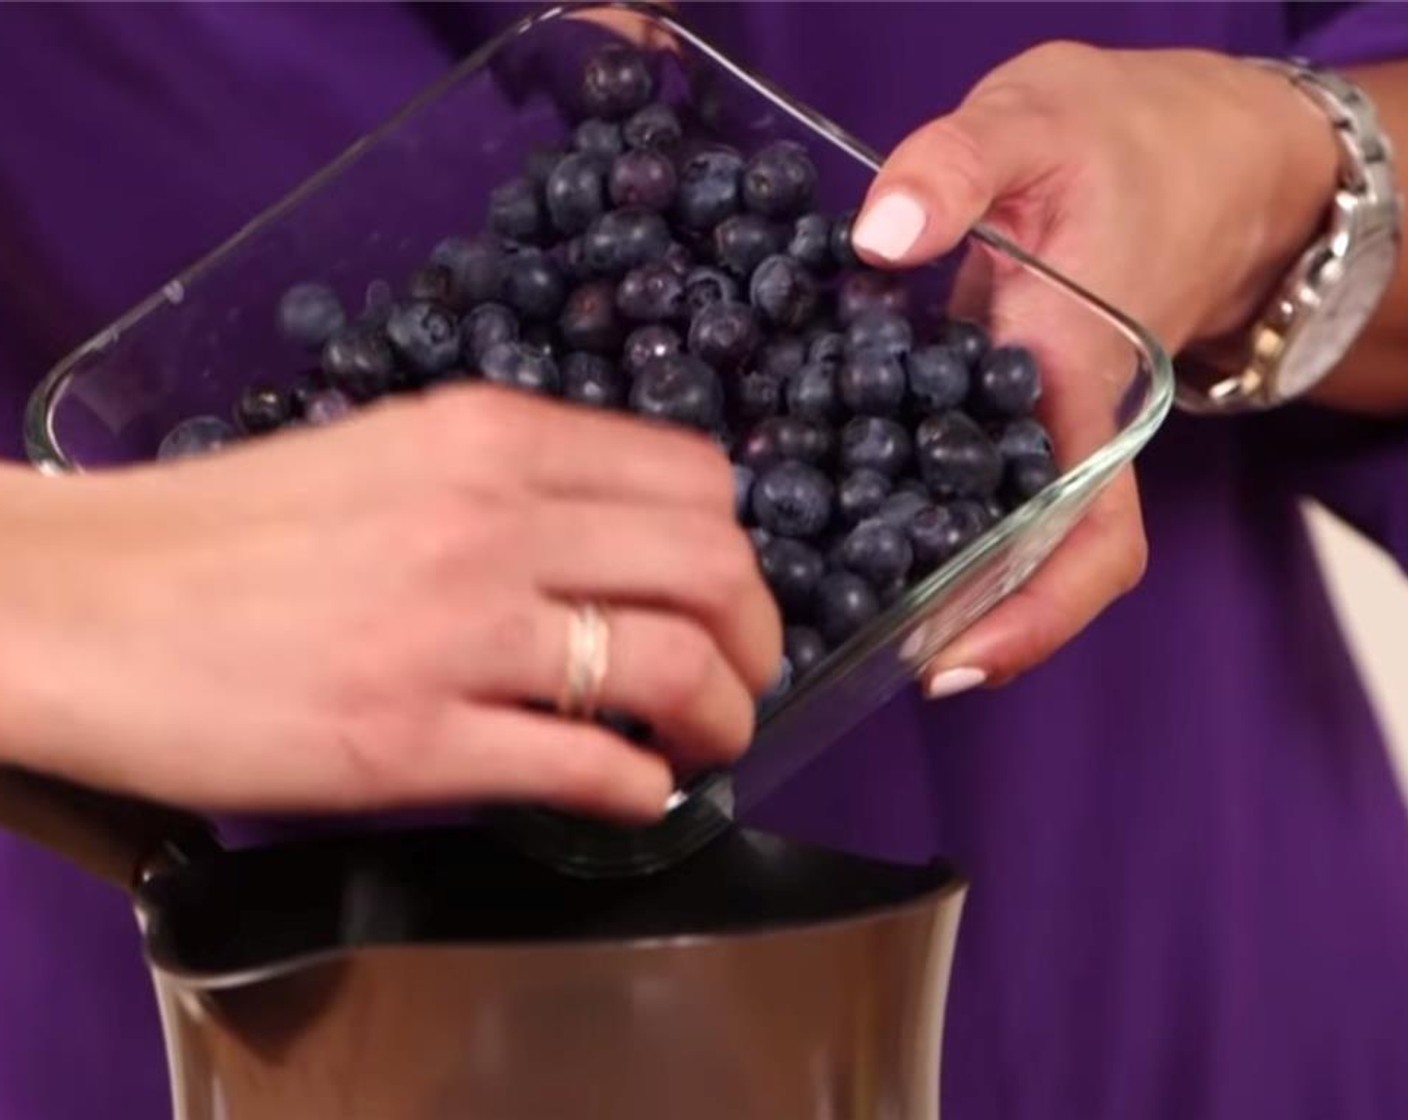 step 10 To make a blueberry compote for a topping, combine the Fresh Blueberry (1 cup), 2 Tbsp of Lemon Juice and 1 tsp of Lemon Zest in a small saucepan set over medium-high heat. Cook, stirring occasionally, for 5 minutes.